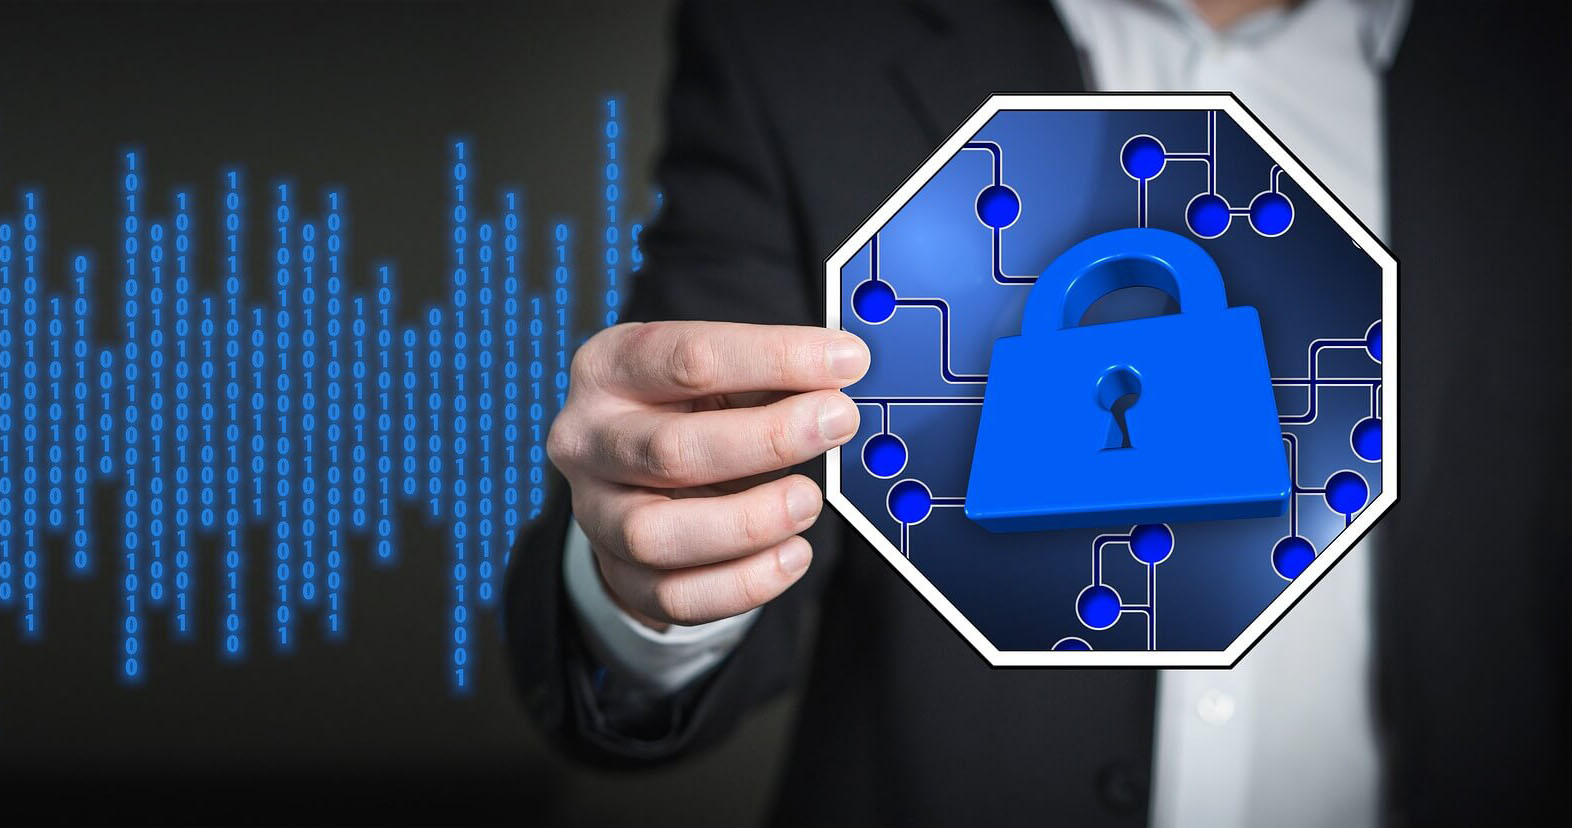 What Is The Difference Between Intrusion Detection And Prevention?